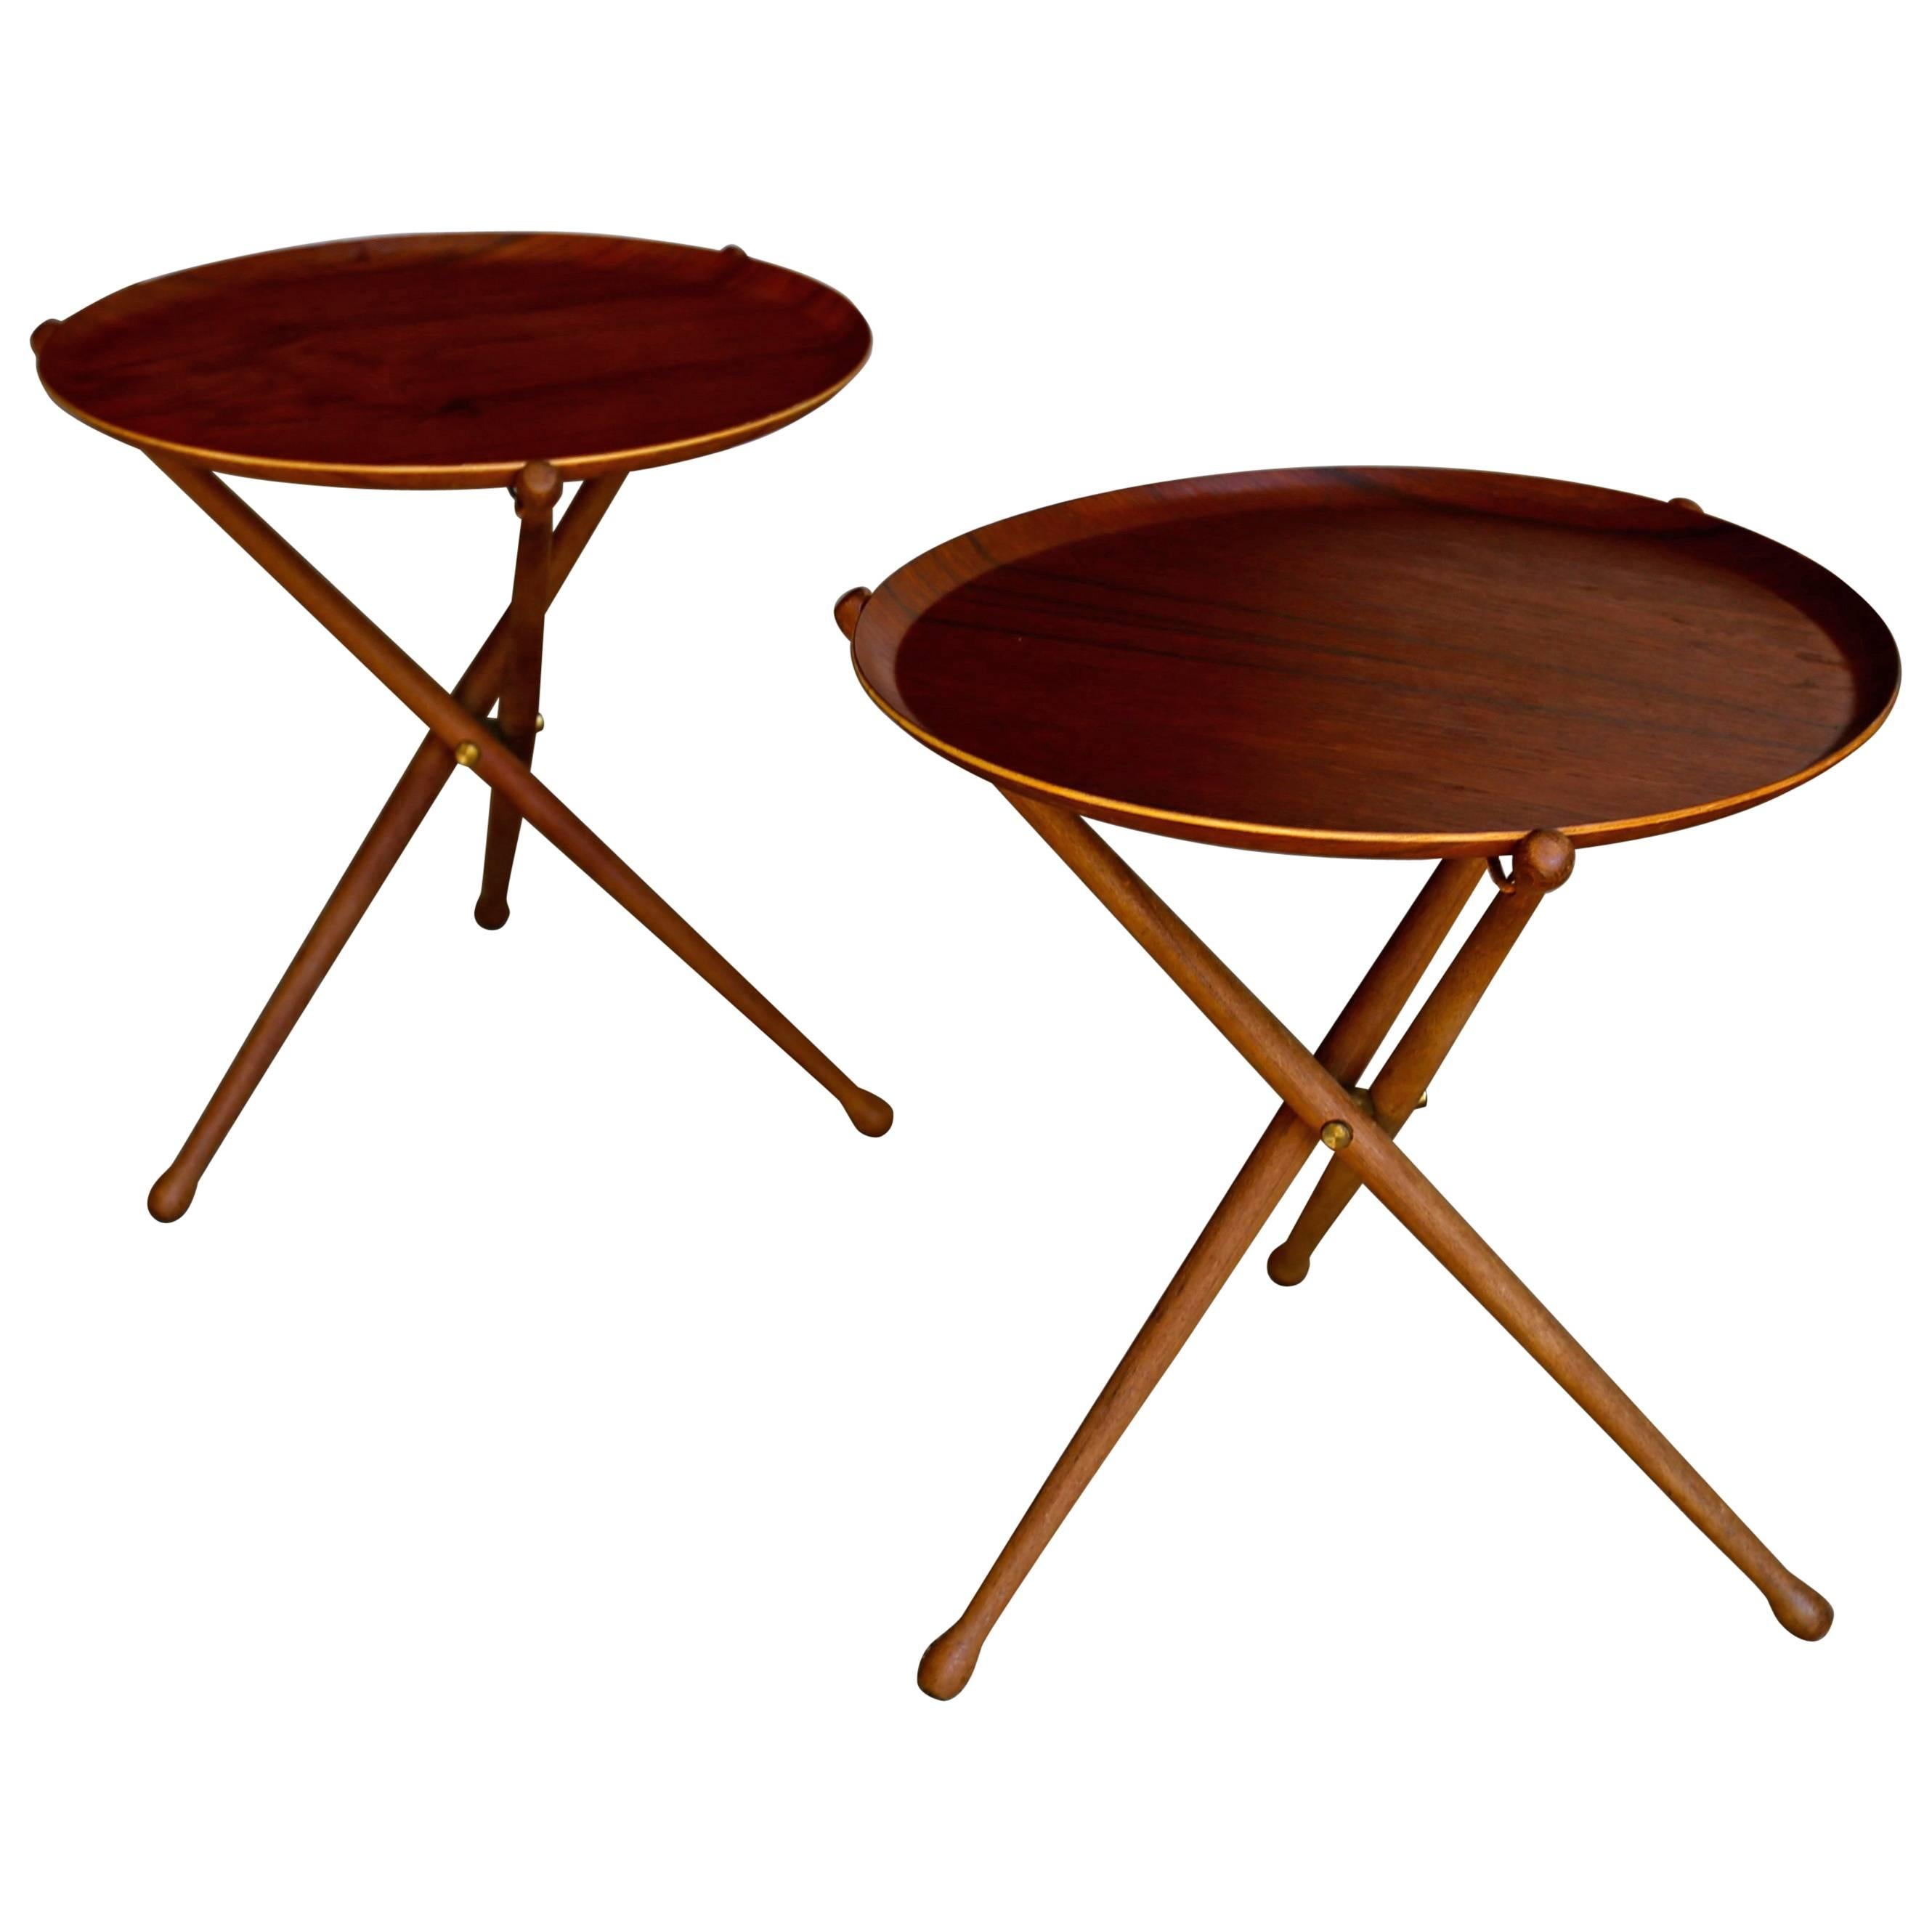 Pair of Tray Tables by Nils Trautner for Ary Nybro